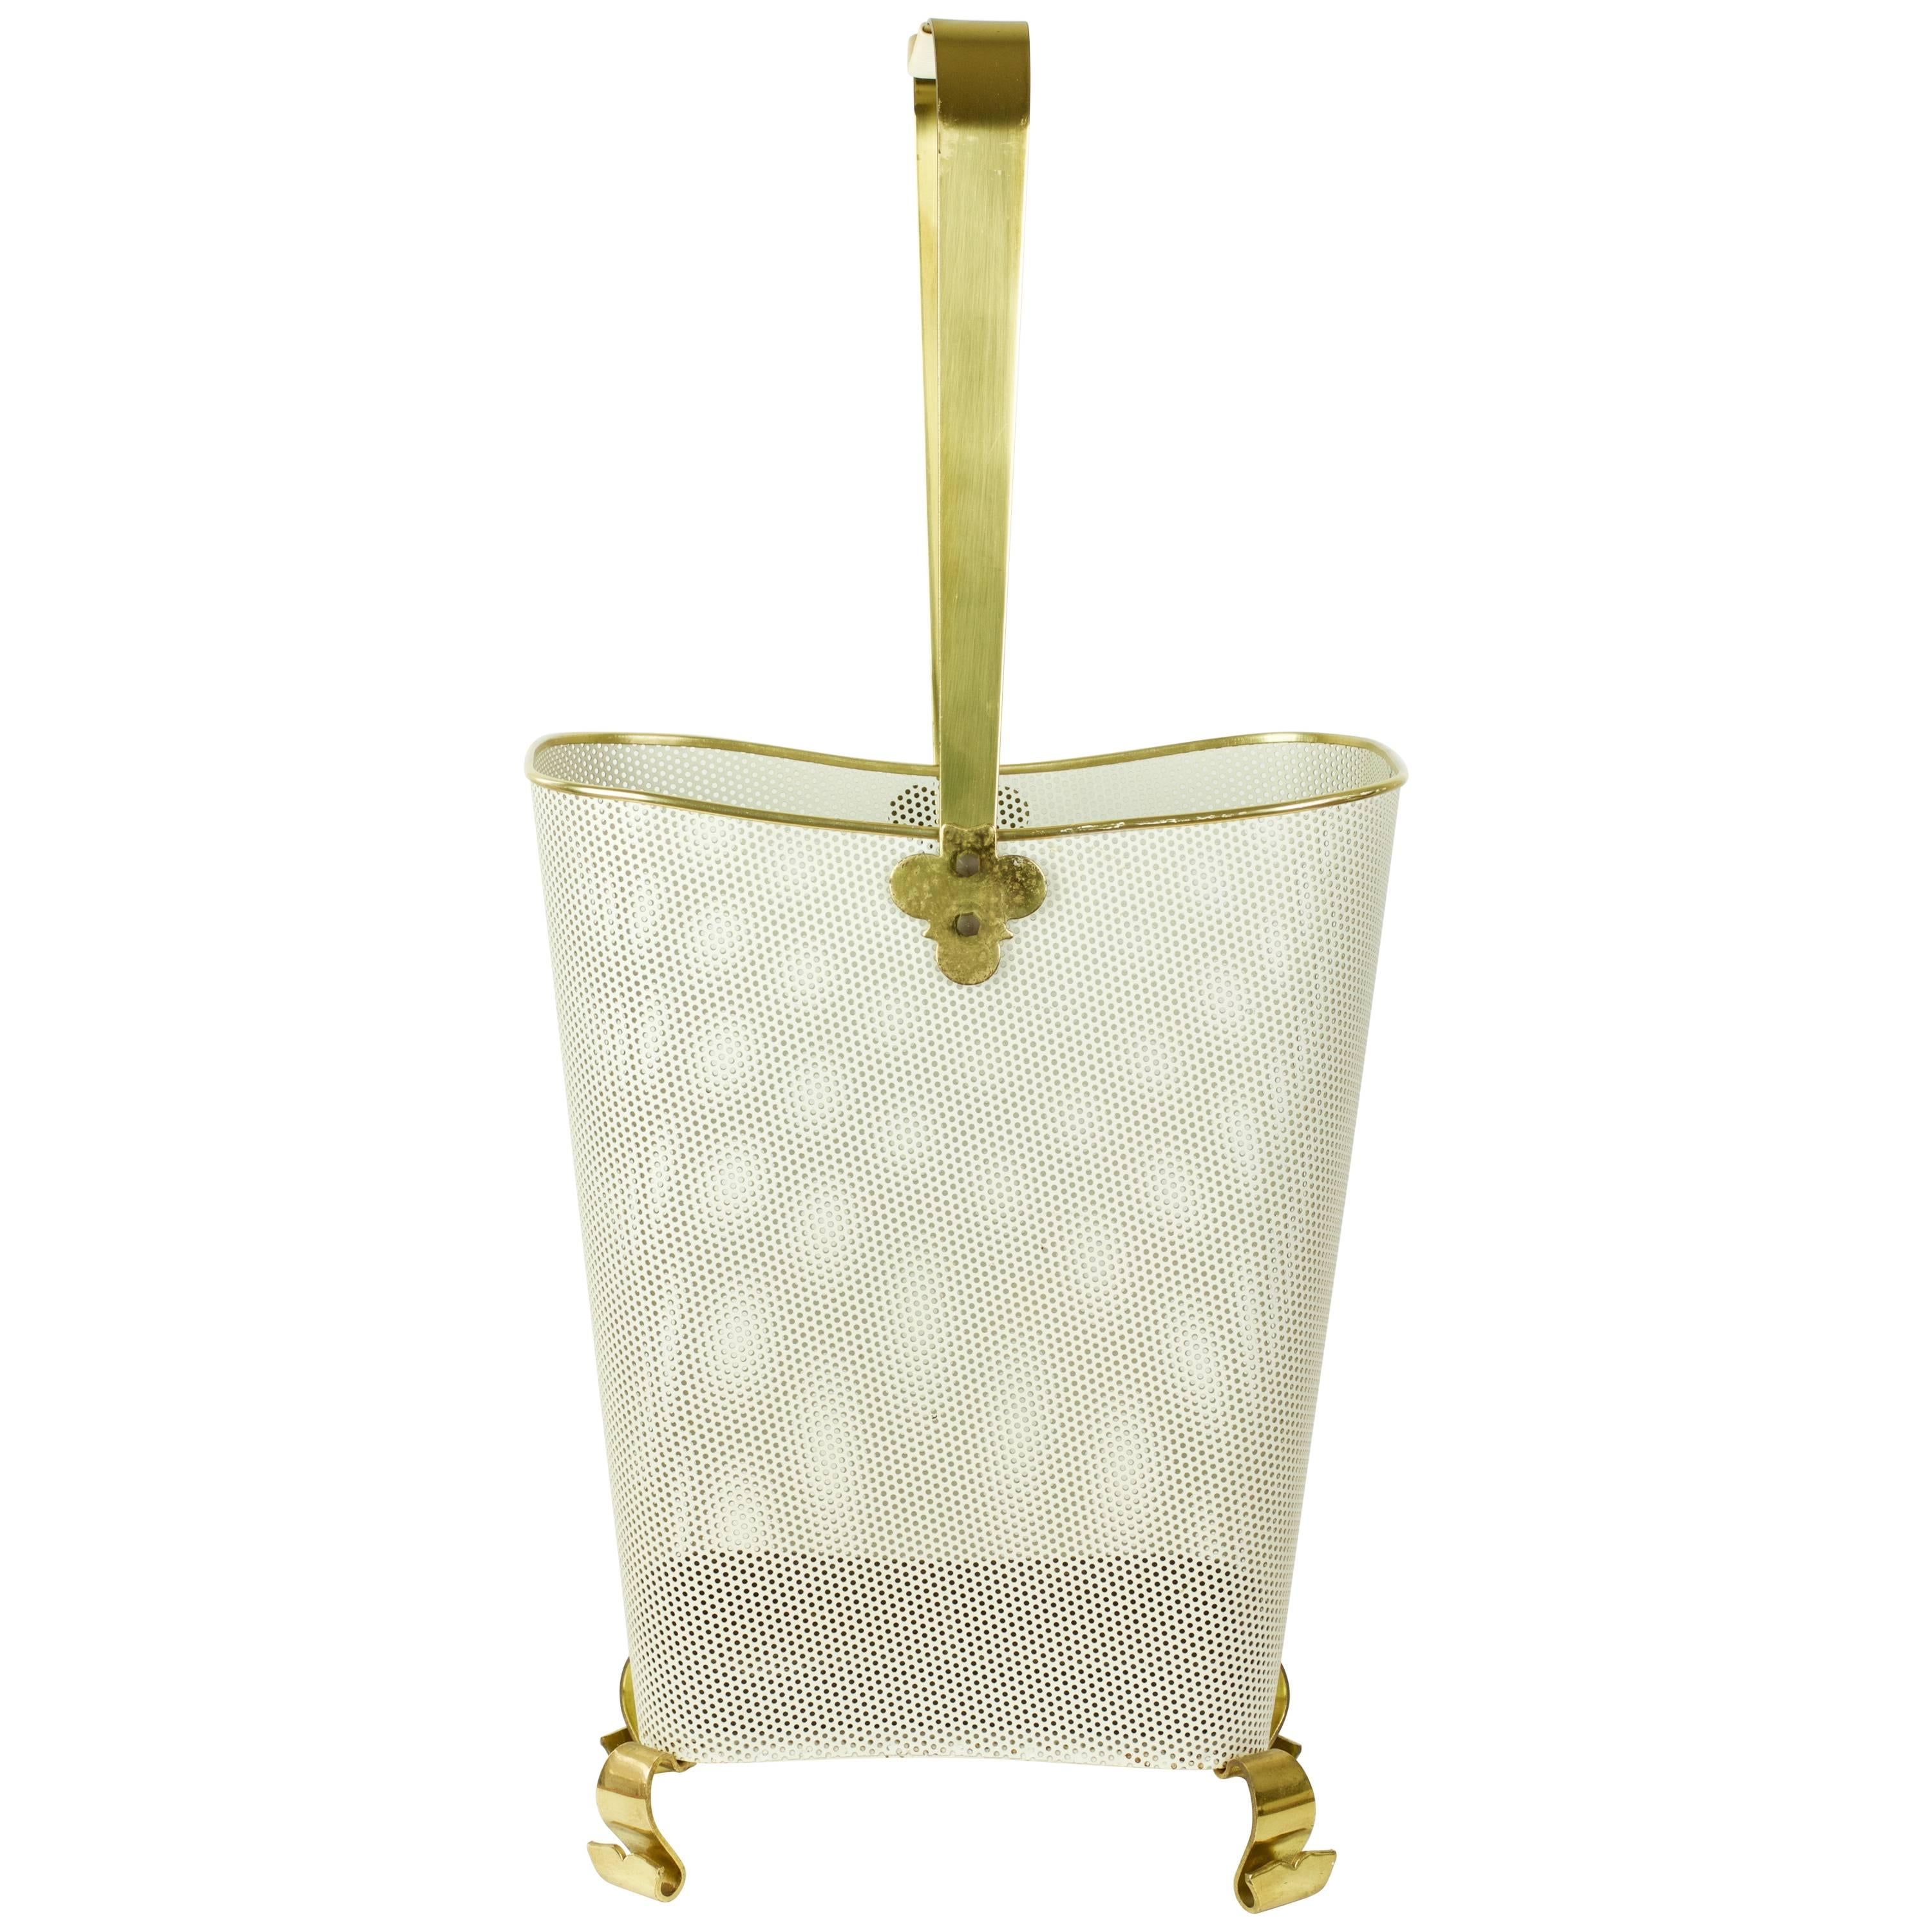 Mathieu Matégot style mid-century umbrella stand mad of white perforated metal basket and the beautifully crafted curved solid polished brass feet and delicate handle finals give the piece a unique and luxurious feel and are very reminiscent of work